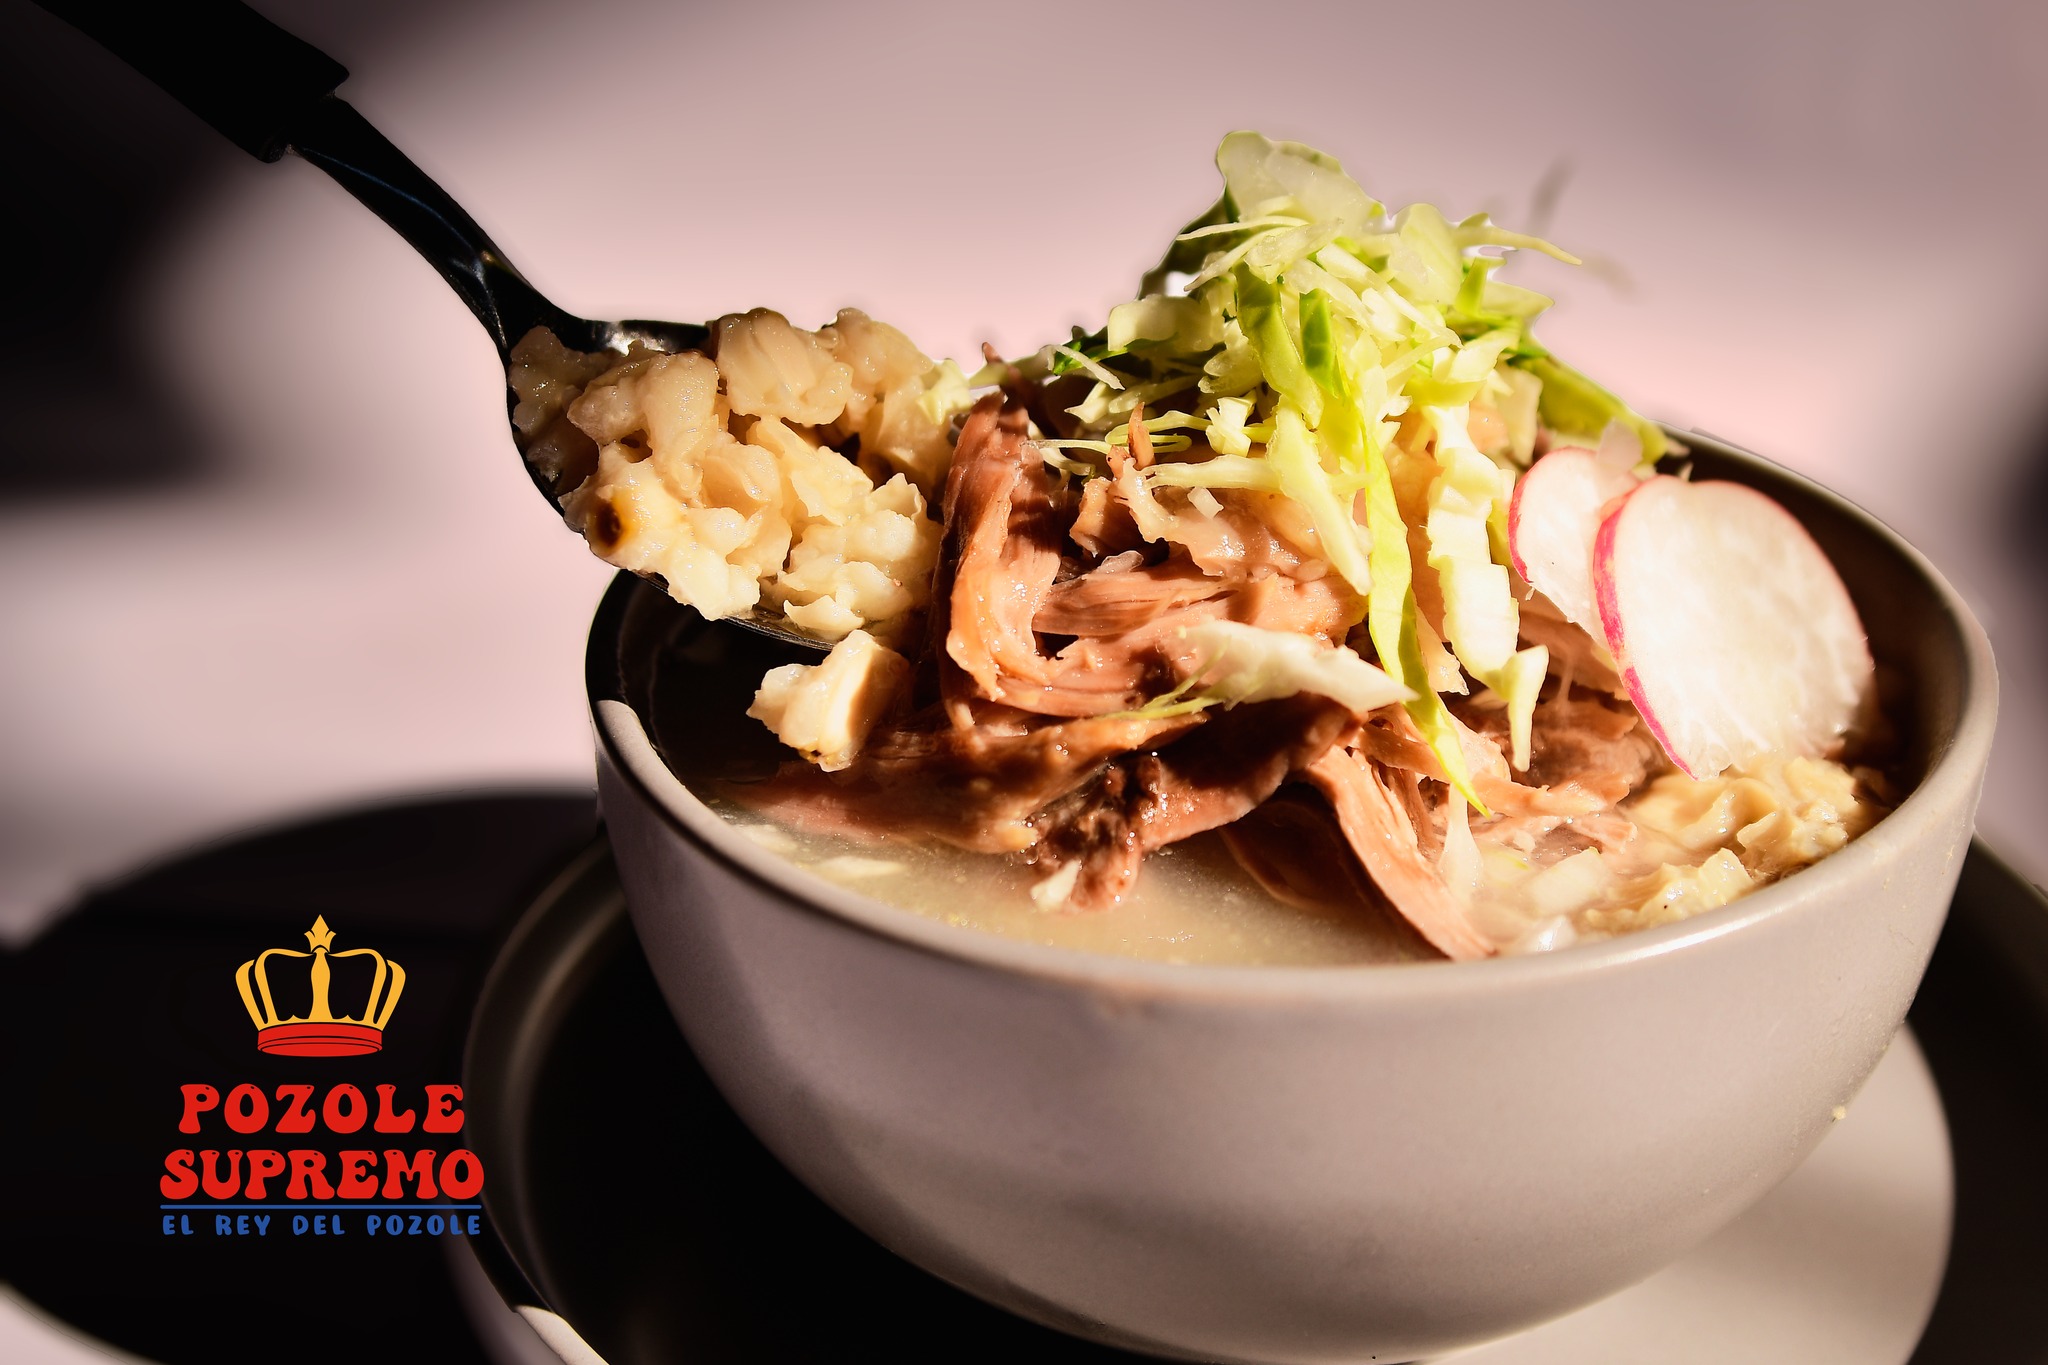 Pozole is a Traditional dish in Jalisco